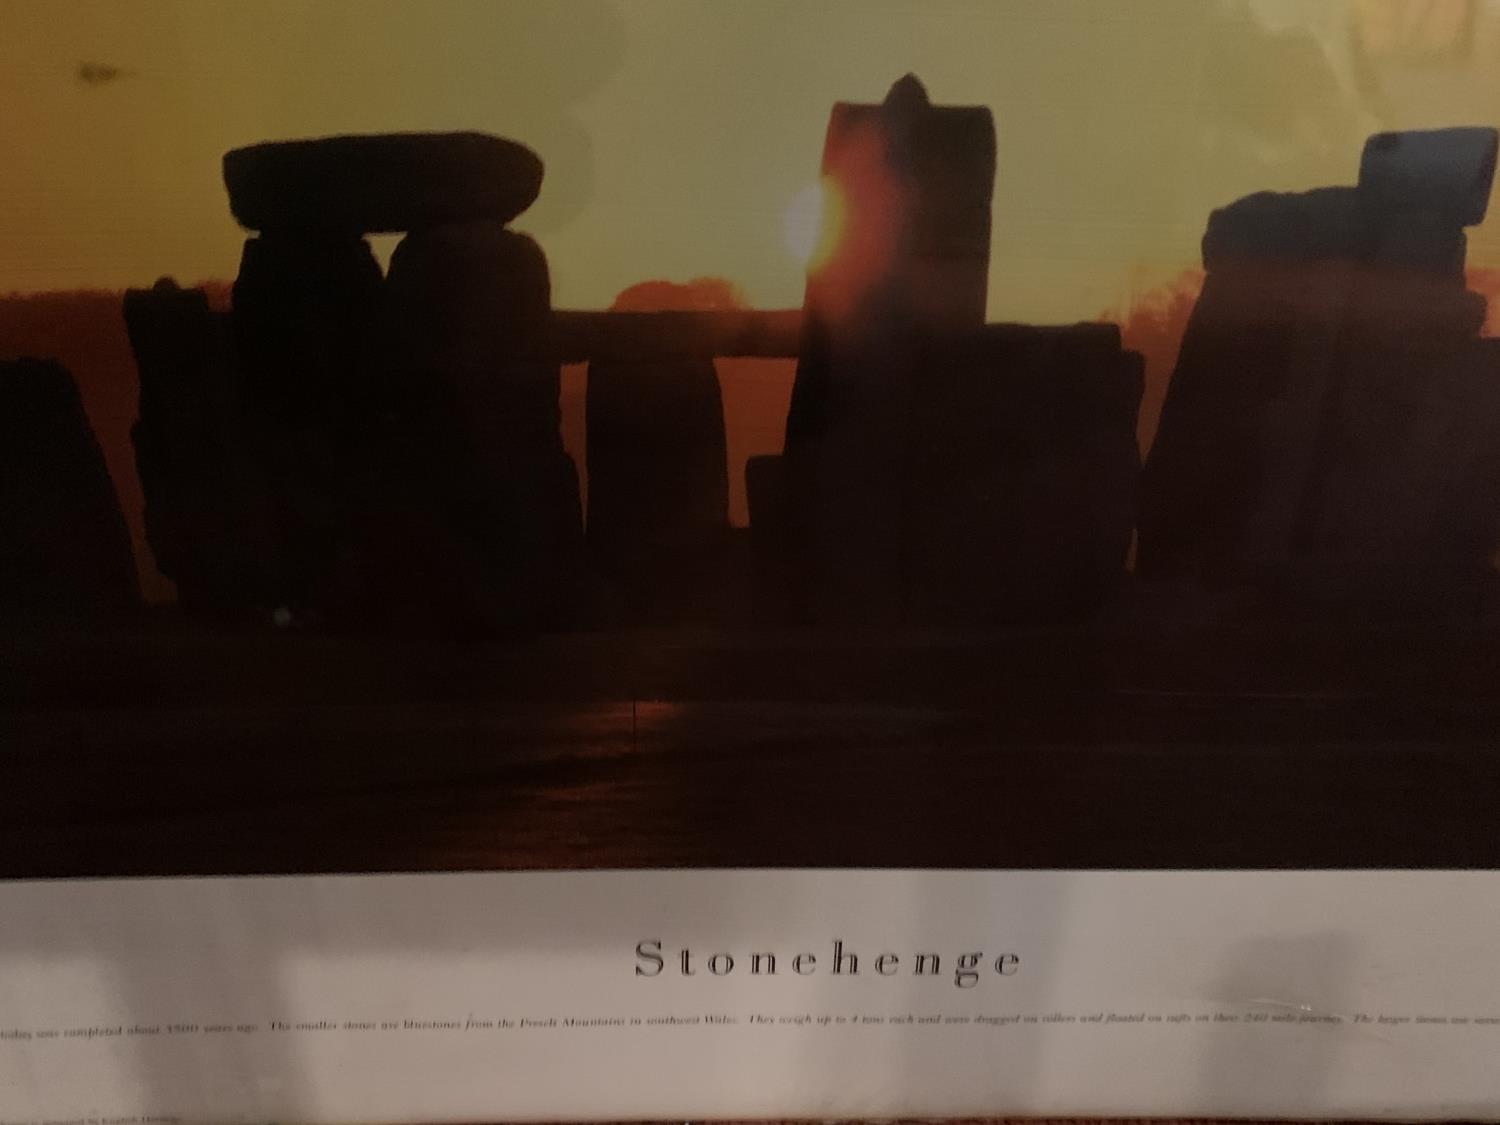 A PANORAMIC PHOTOGRAPH OF STONEHENGE BY JAMES BLAKEWAY - Image 3 of 3